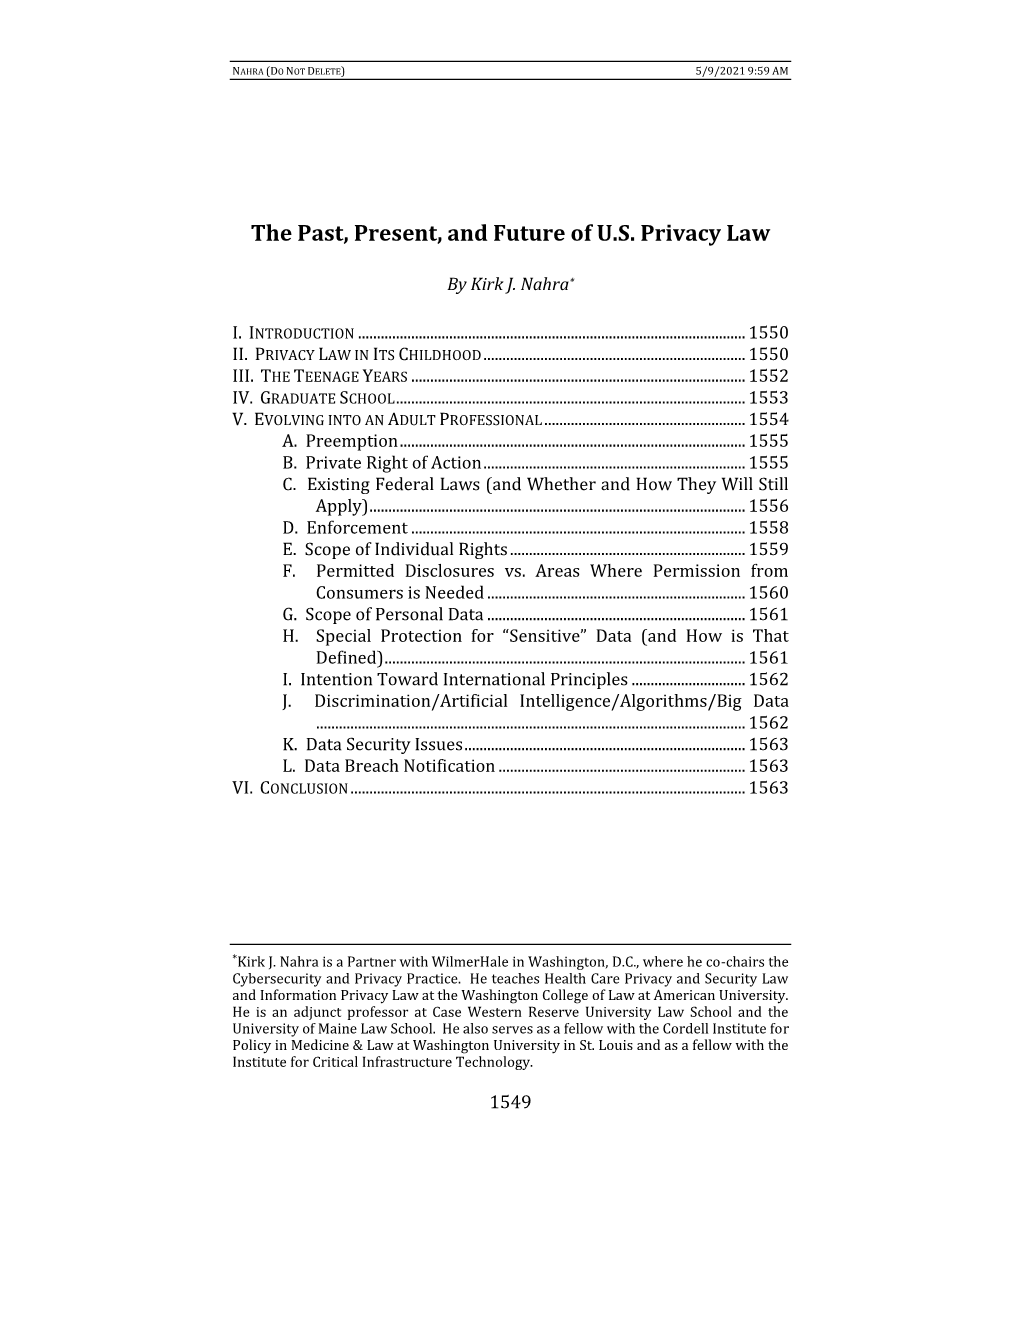 The Past, Present, and Future of U.S. Privacy Law